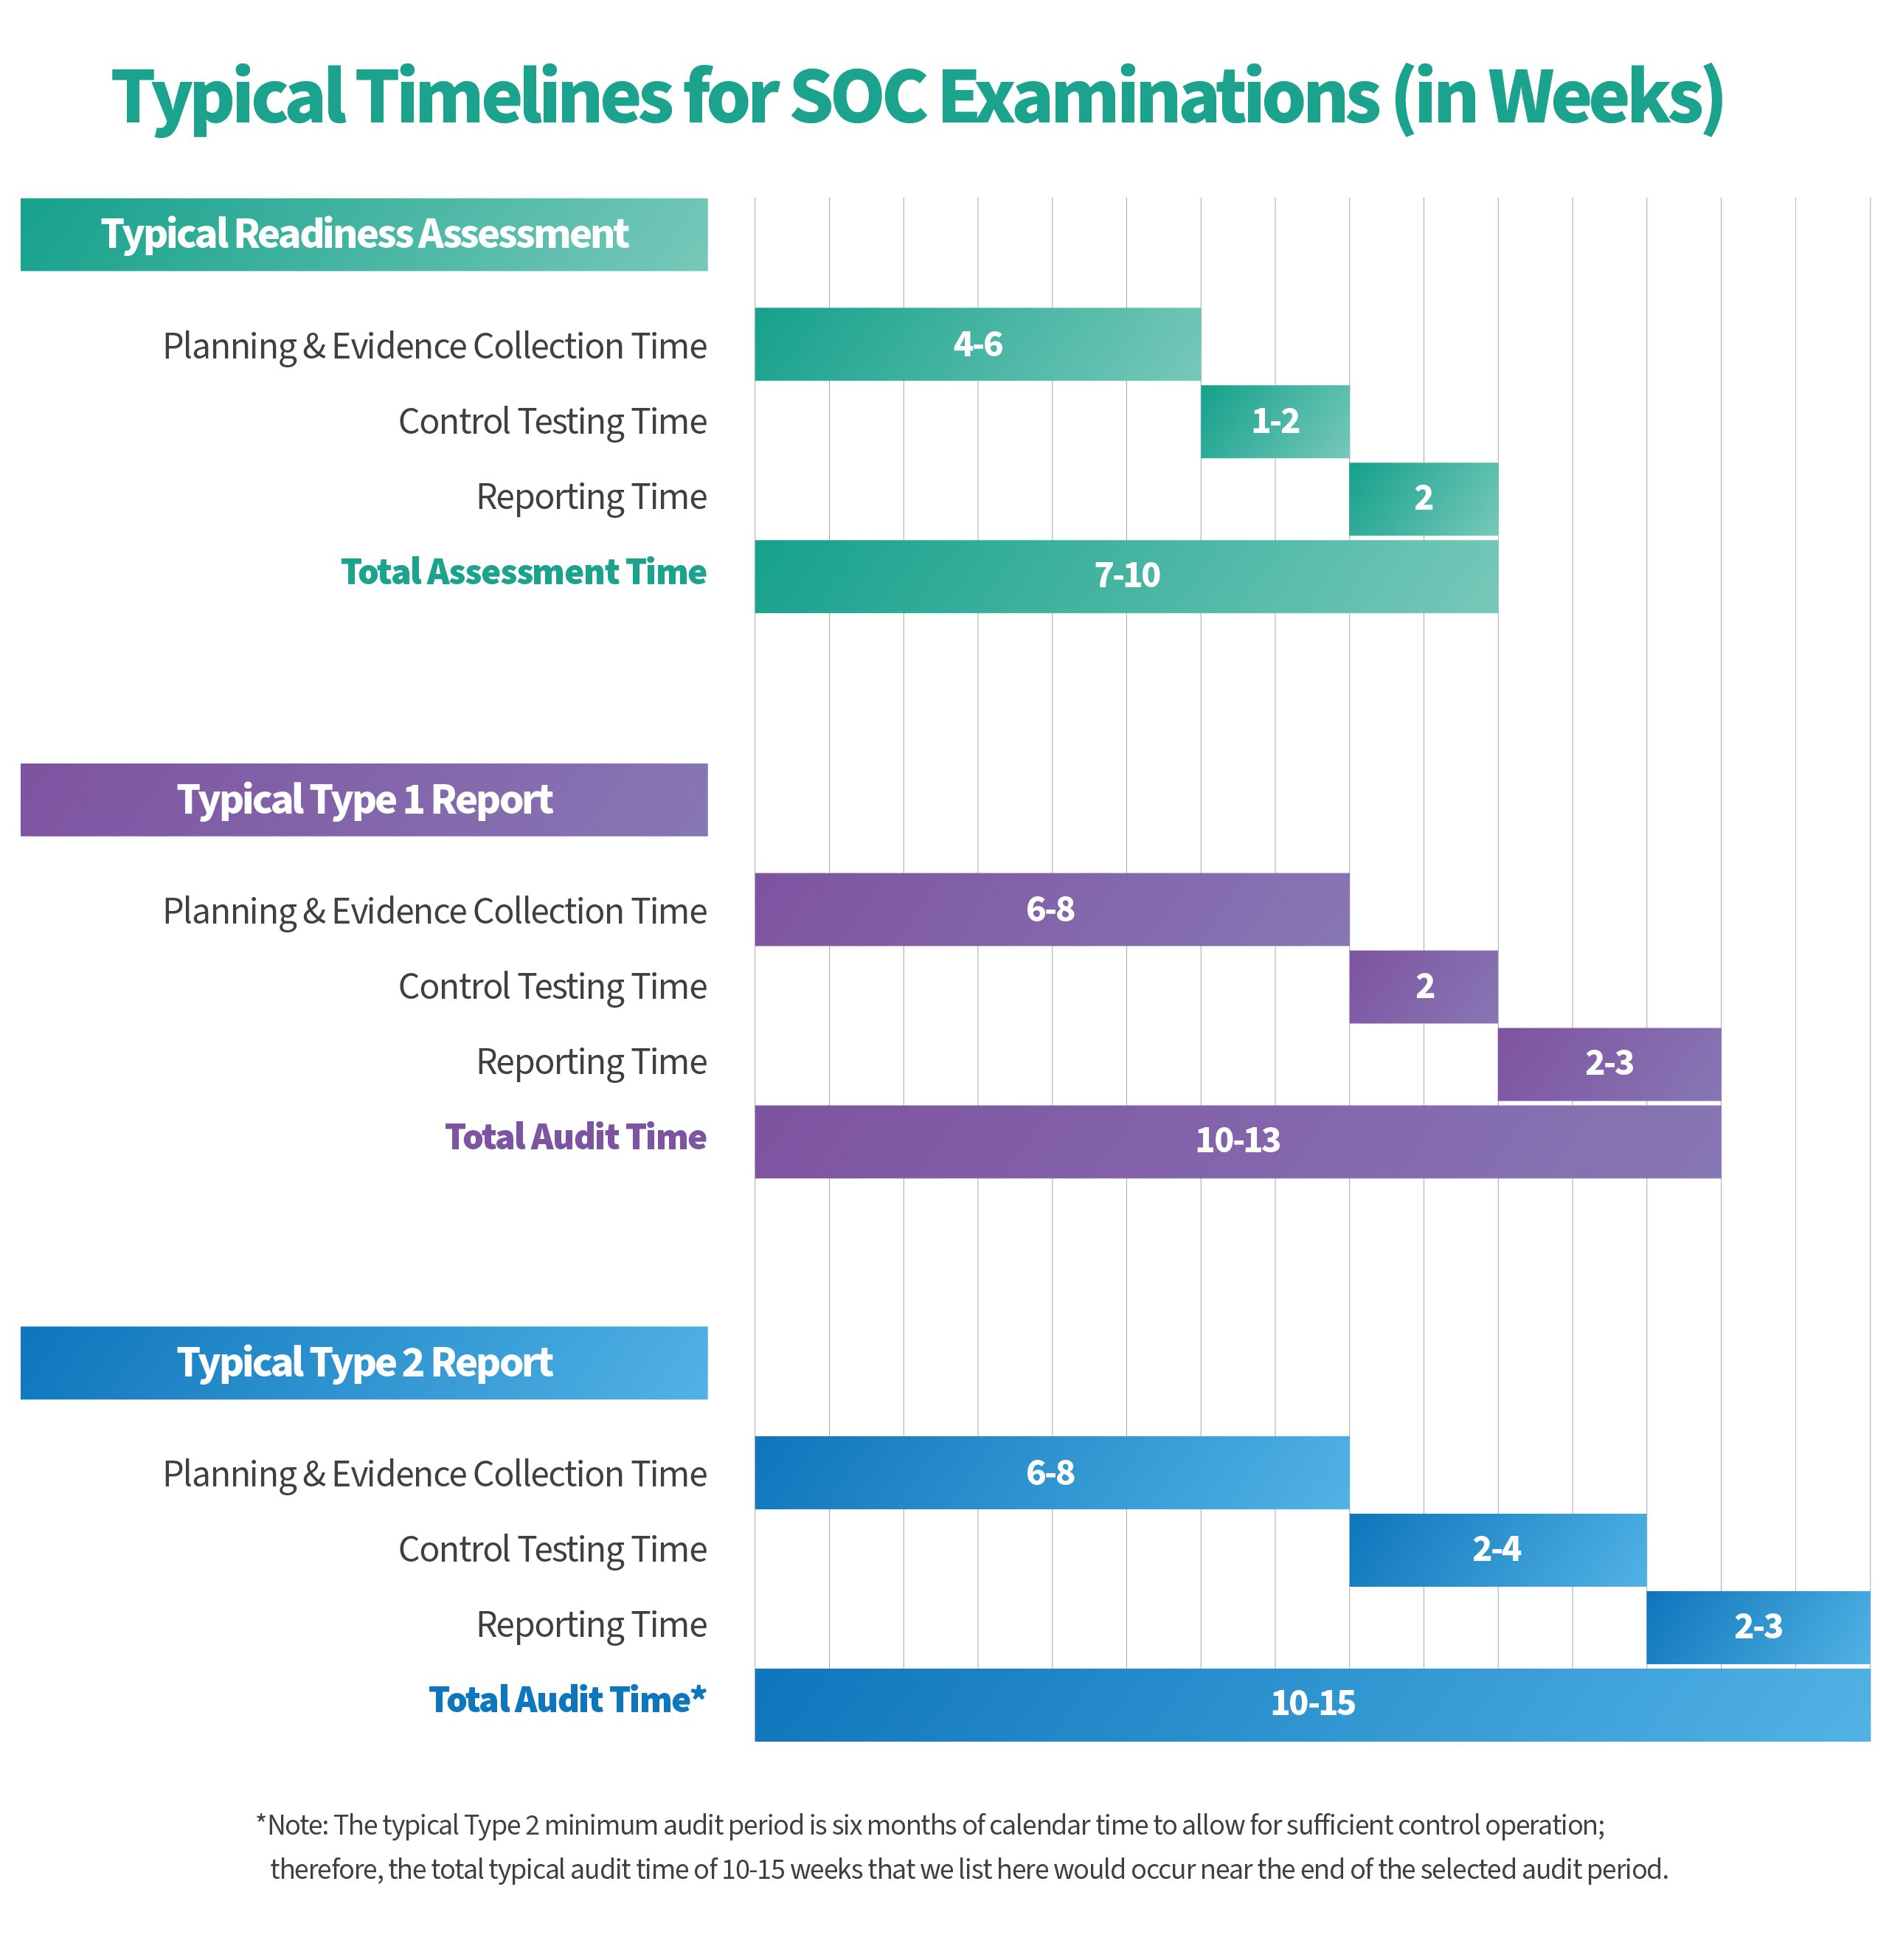 Typical Timelines for SOC Examinations in Weeks